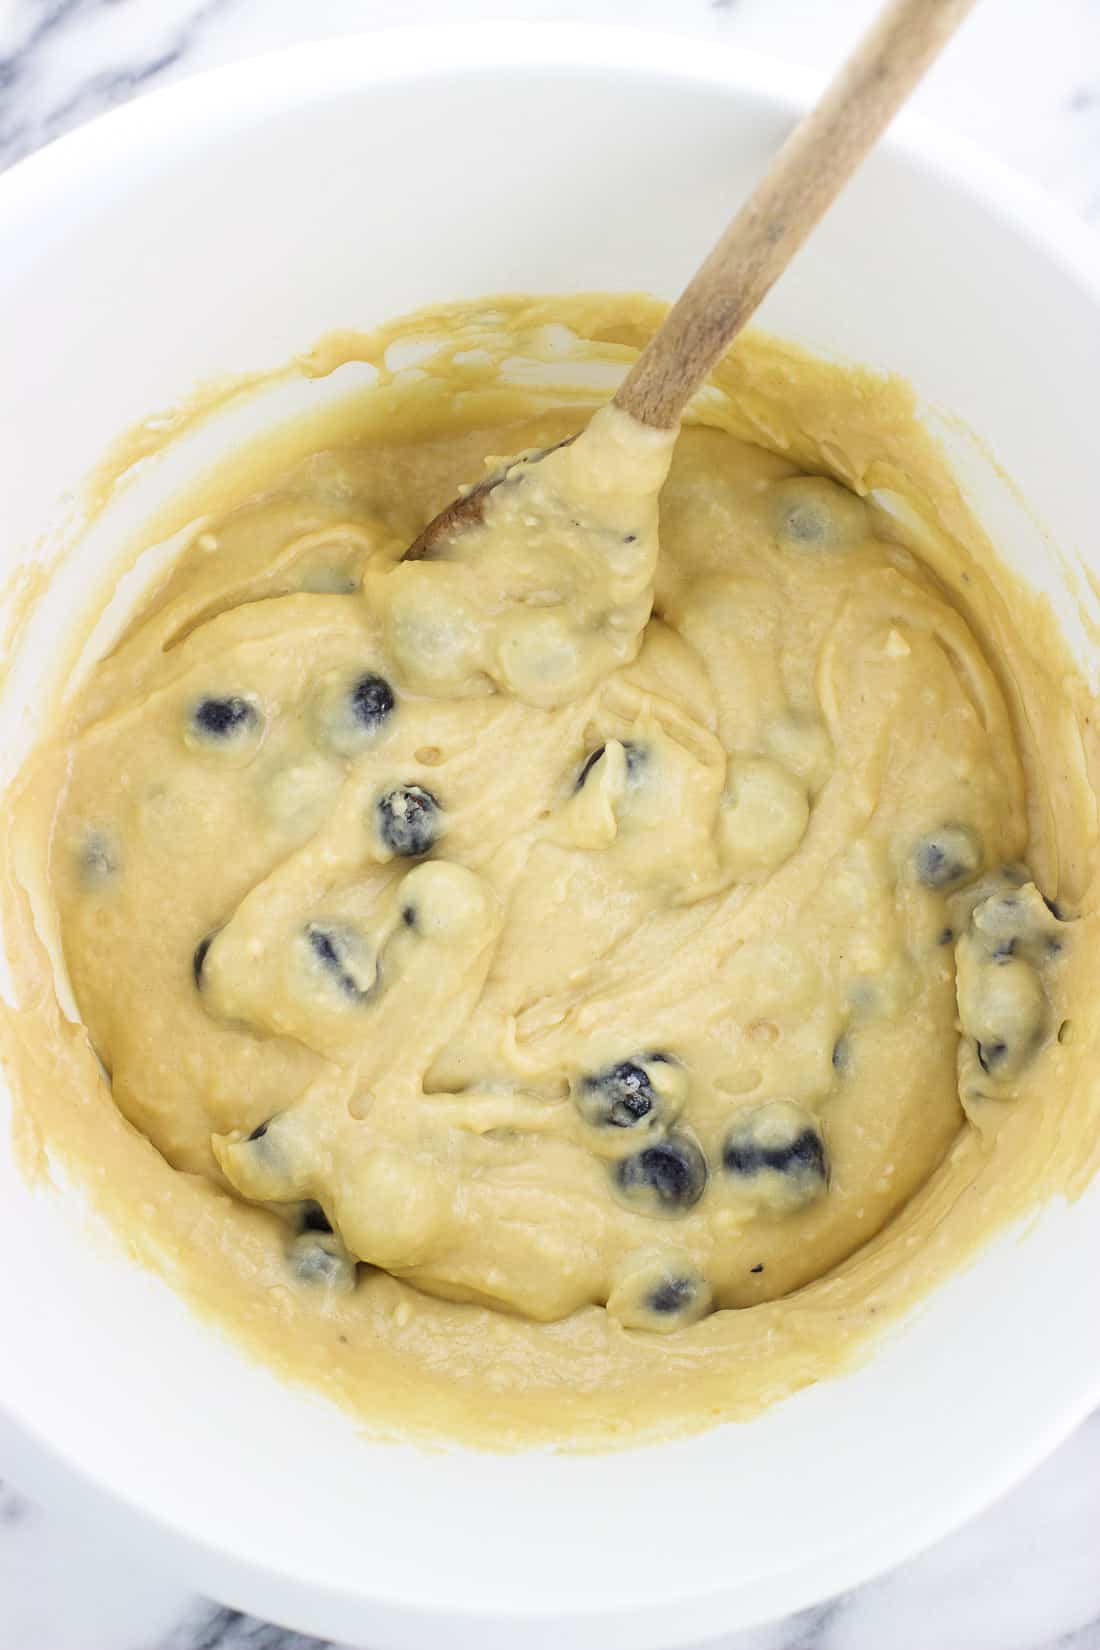 Blueberries stirred into muffin batter in a plastic mixing bowl